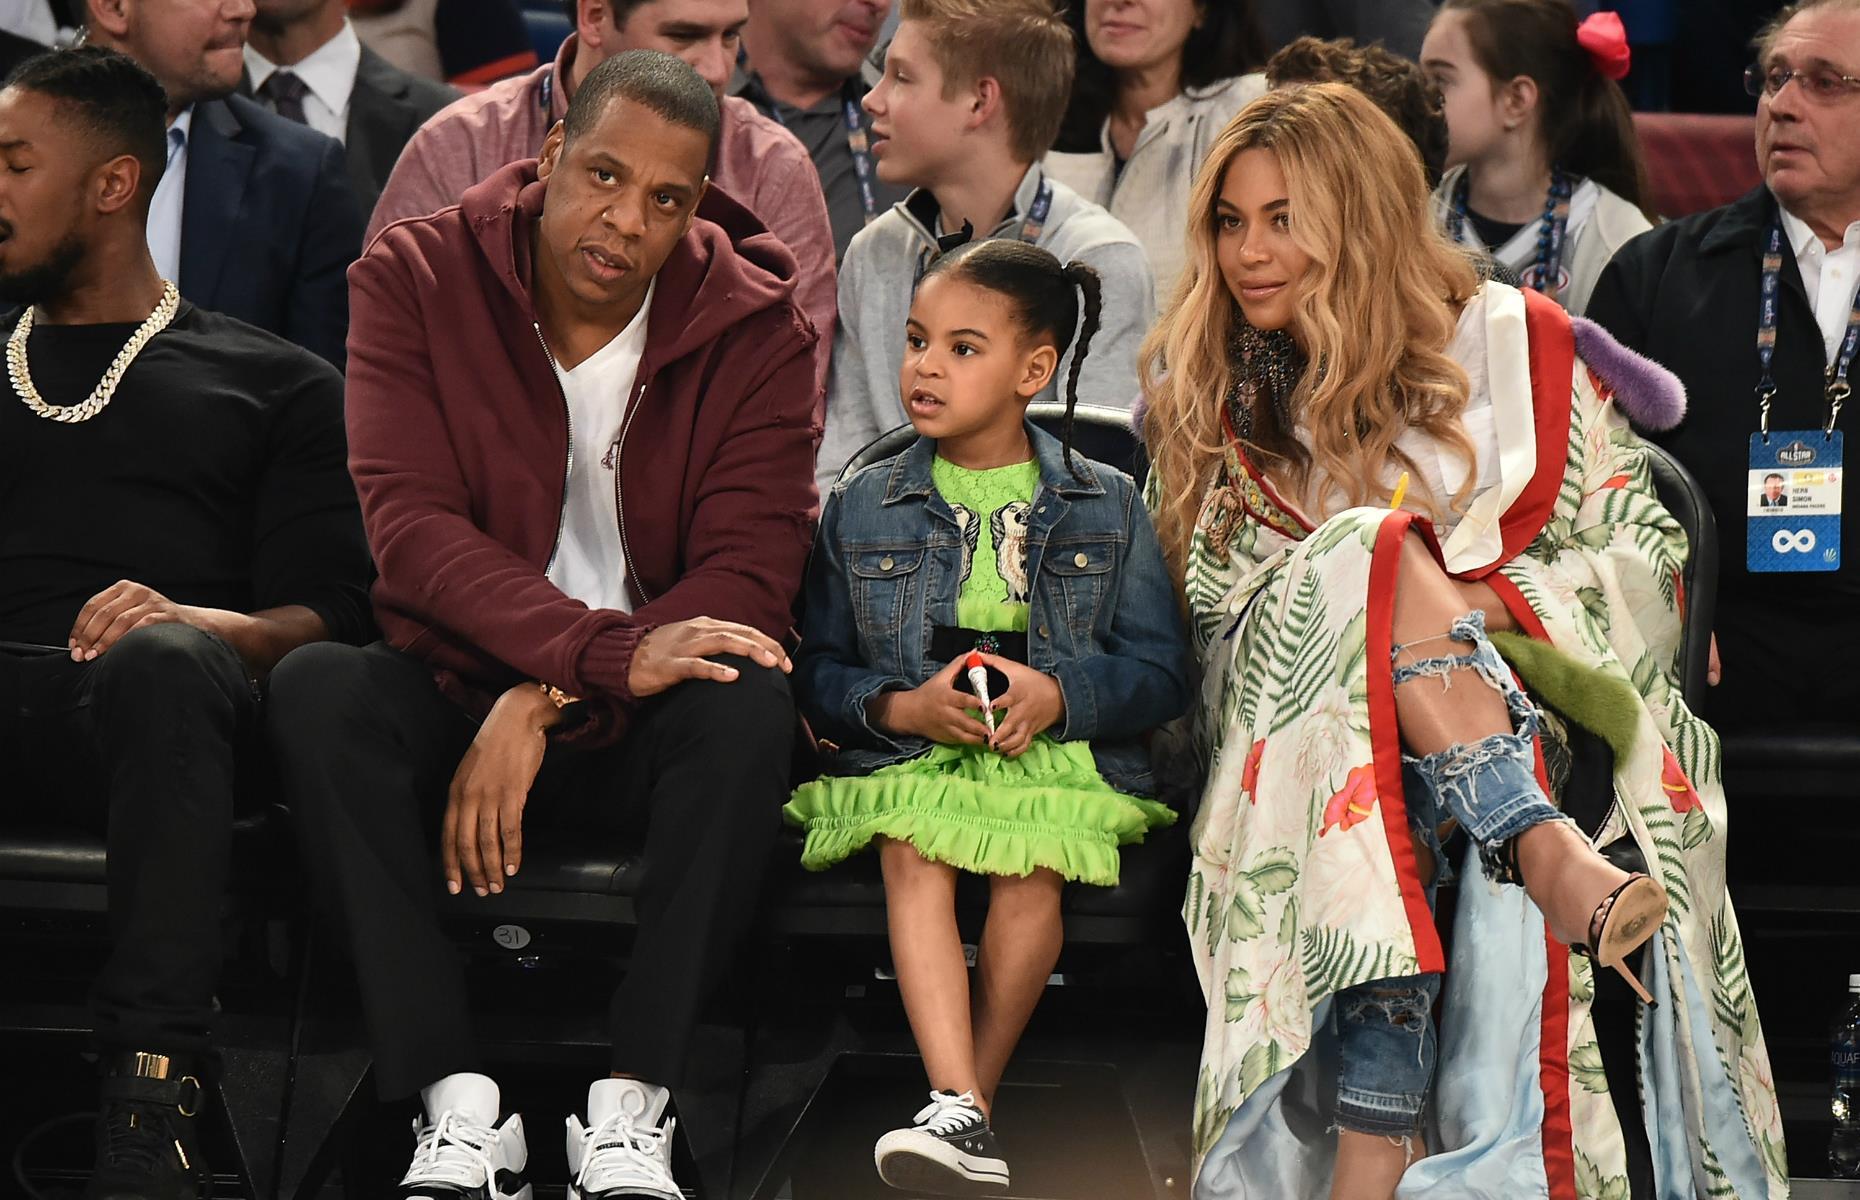 The names Blue Ivy, Rumi, and Sir